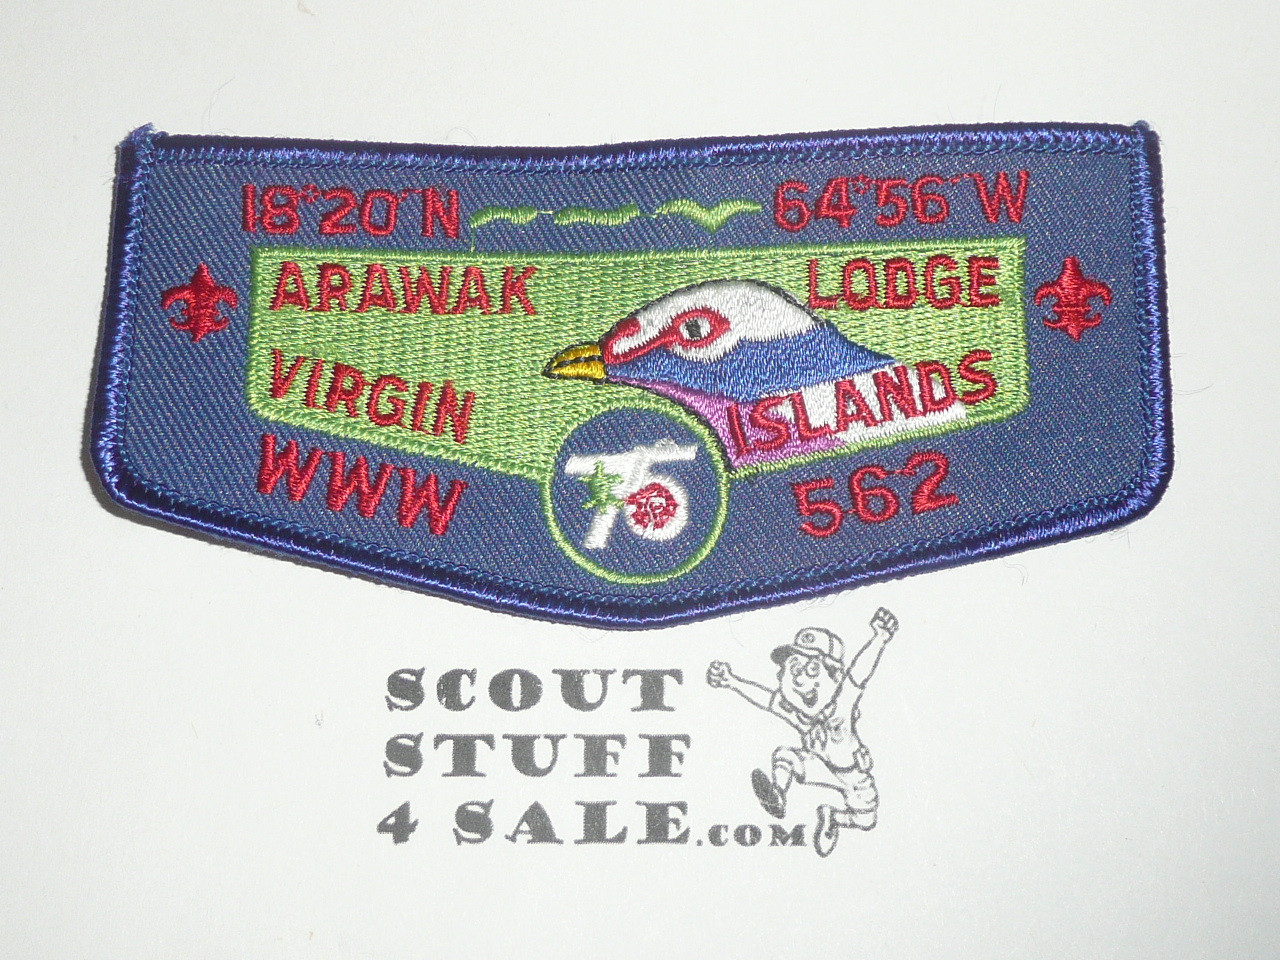 Order of the Arrow Lodge #562 Arawak f5 OA 75th Anniversary Flap Patch - Boy Scout